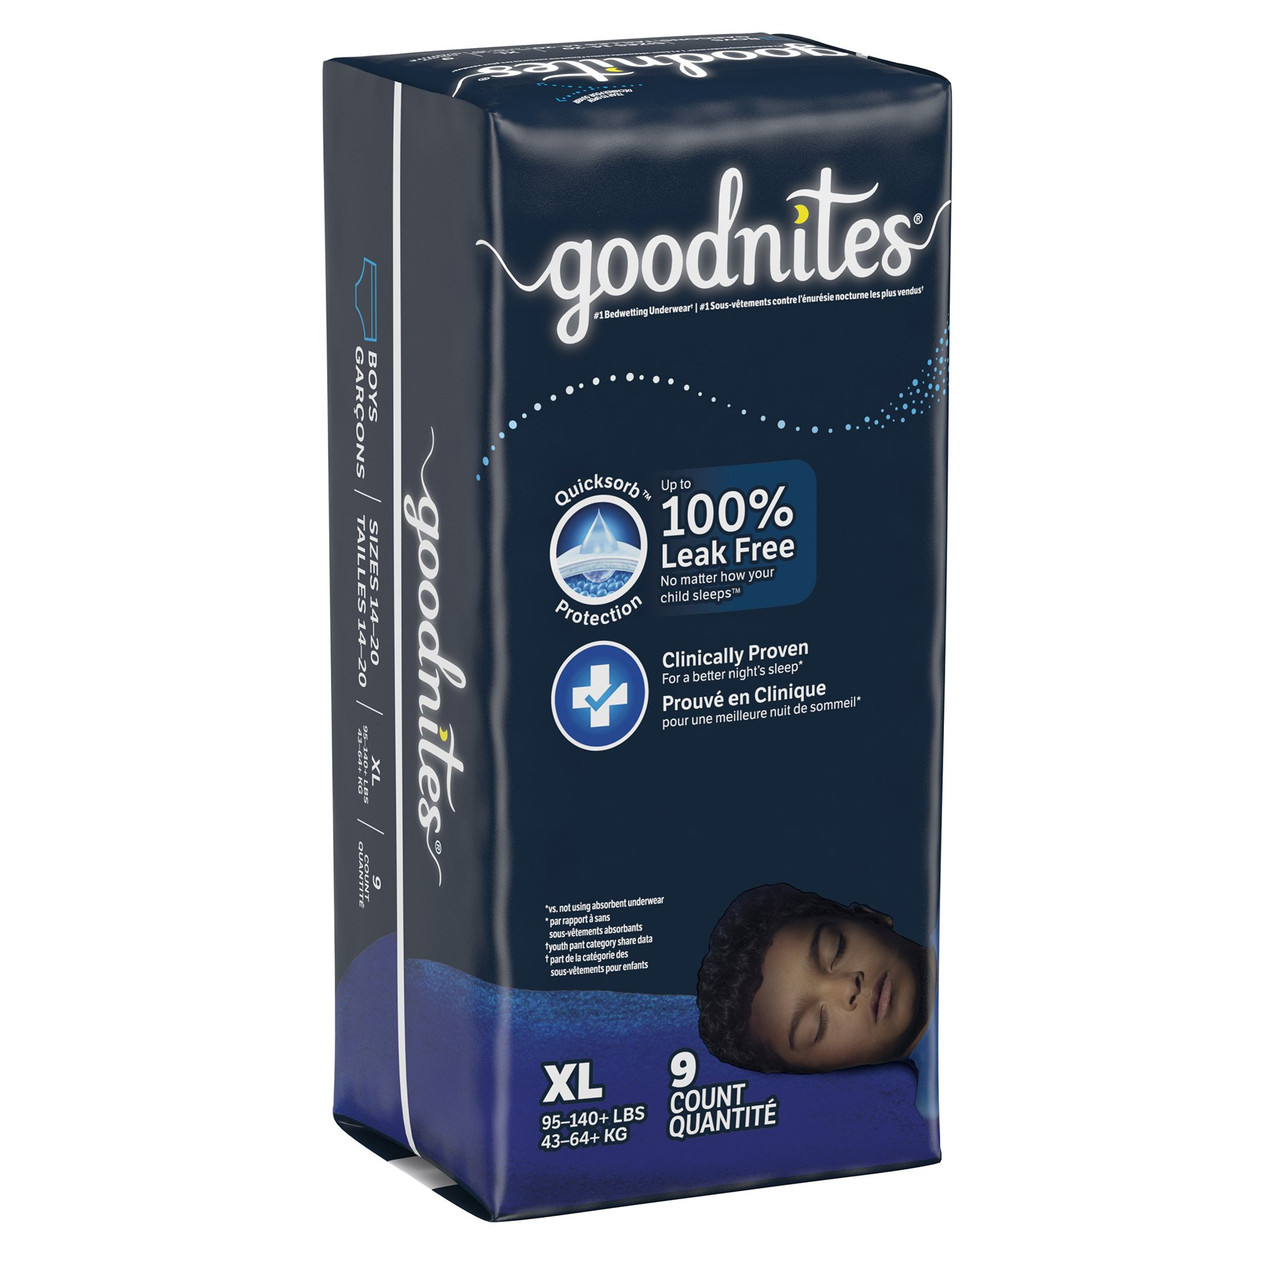  Goodnites Boys' Nighttime Bedwetting Underwear, Size Extra  Large (95-140+ lbs), 28 Ct (2 Packs of 14), Packaging May Vary : Health &  Household